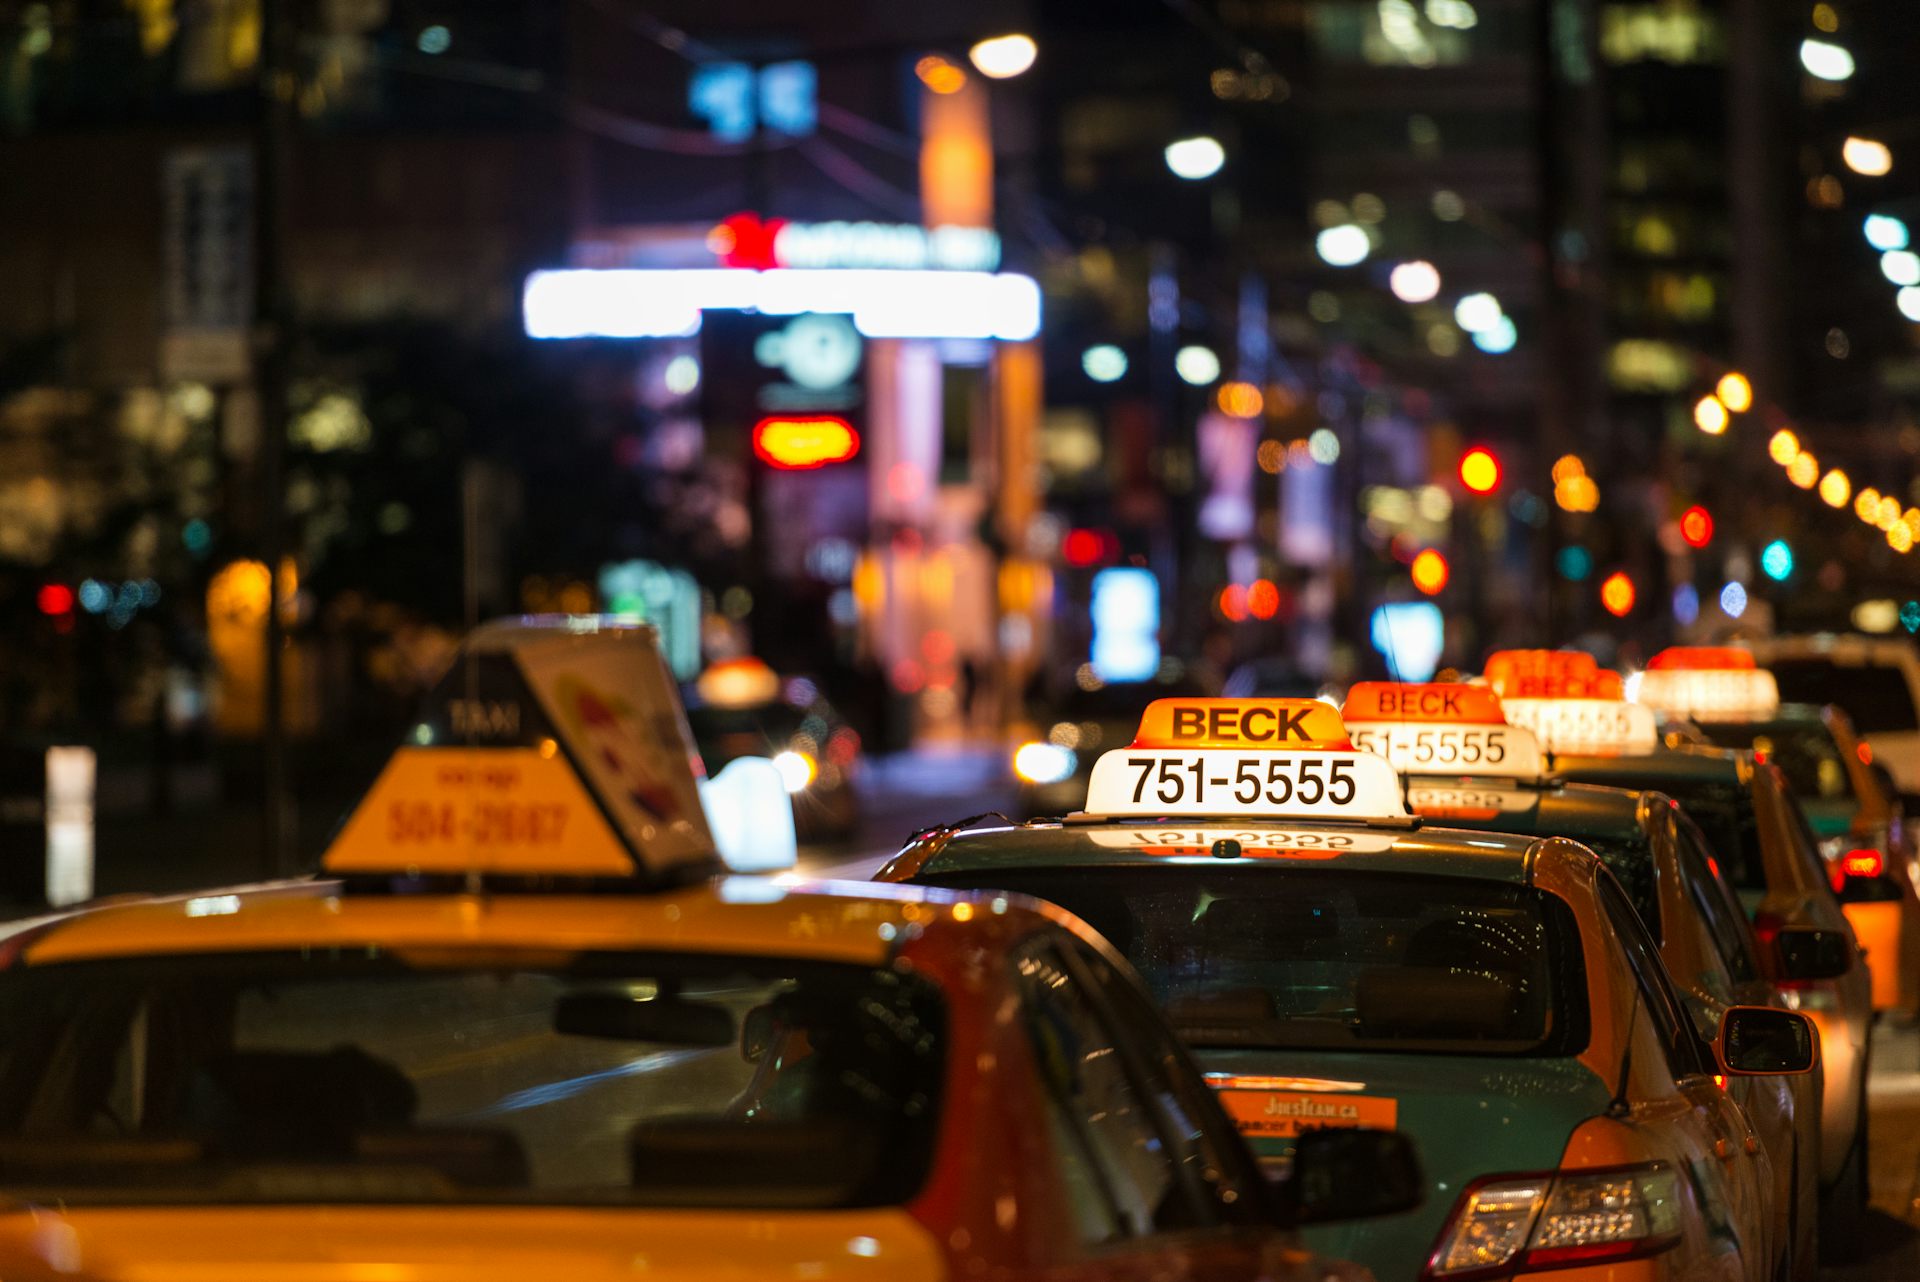 In Toronto, Ont., Uber drivers and taxi drivers were pitted against each other in the media. (Shutterstock)